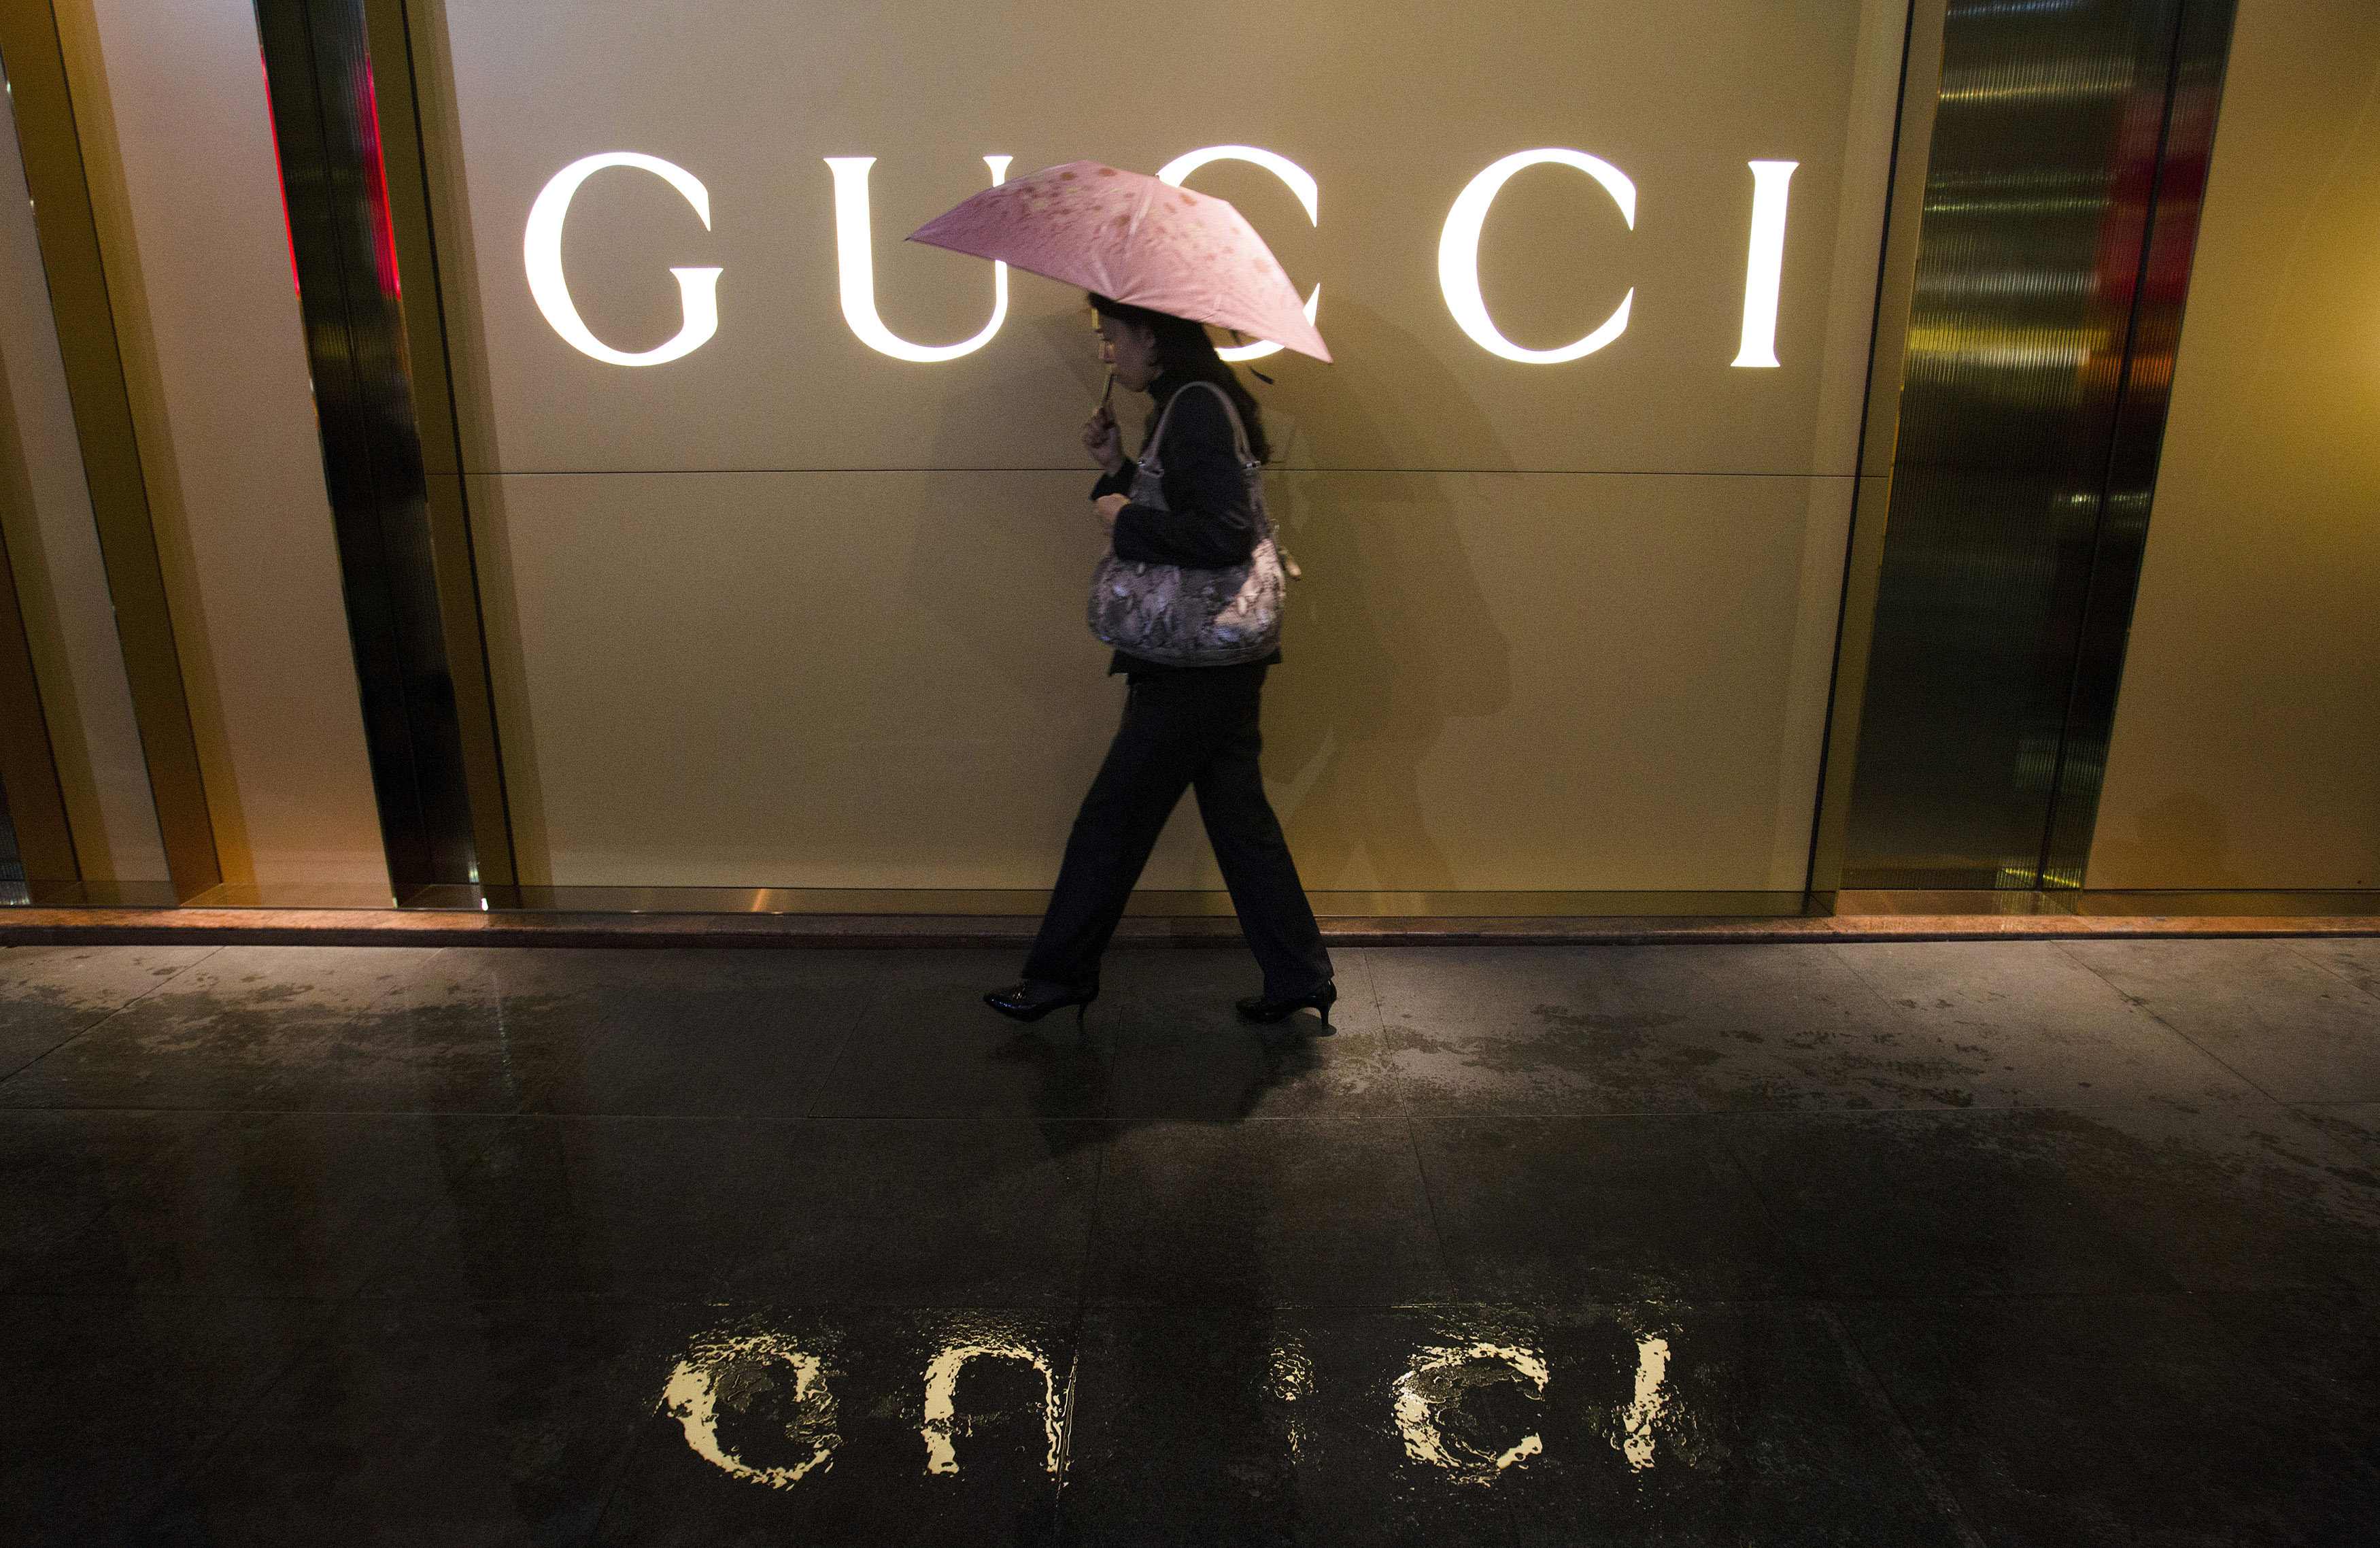 Logo Fatigue Is Hurting Louis Vuitton, Gucci, and Prada - Racked